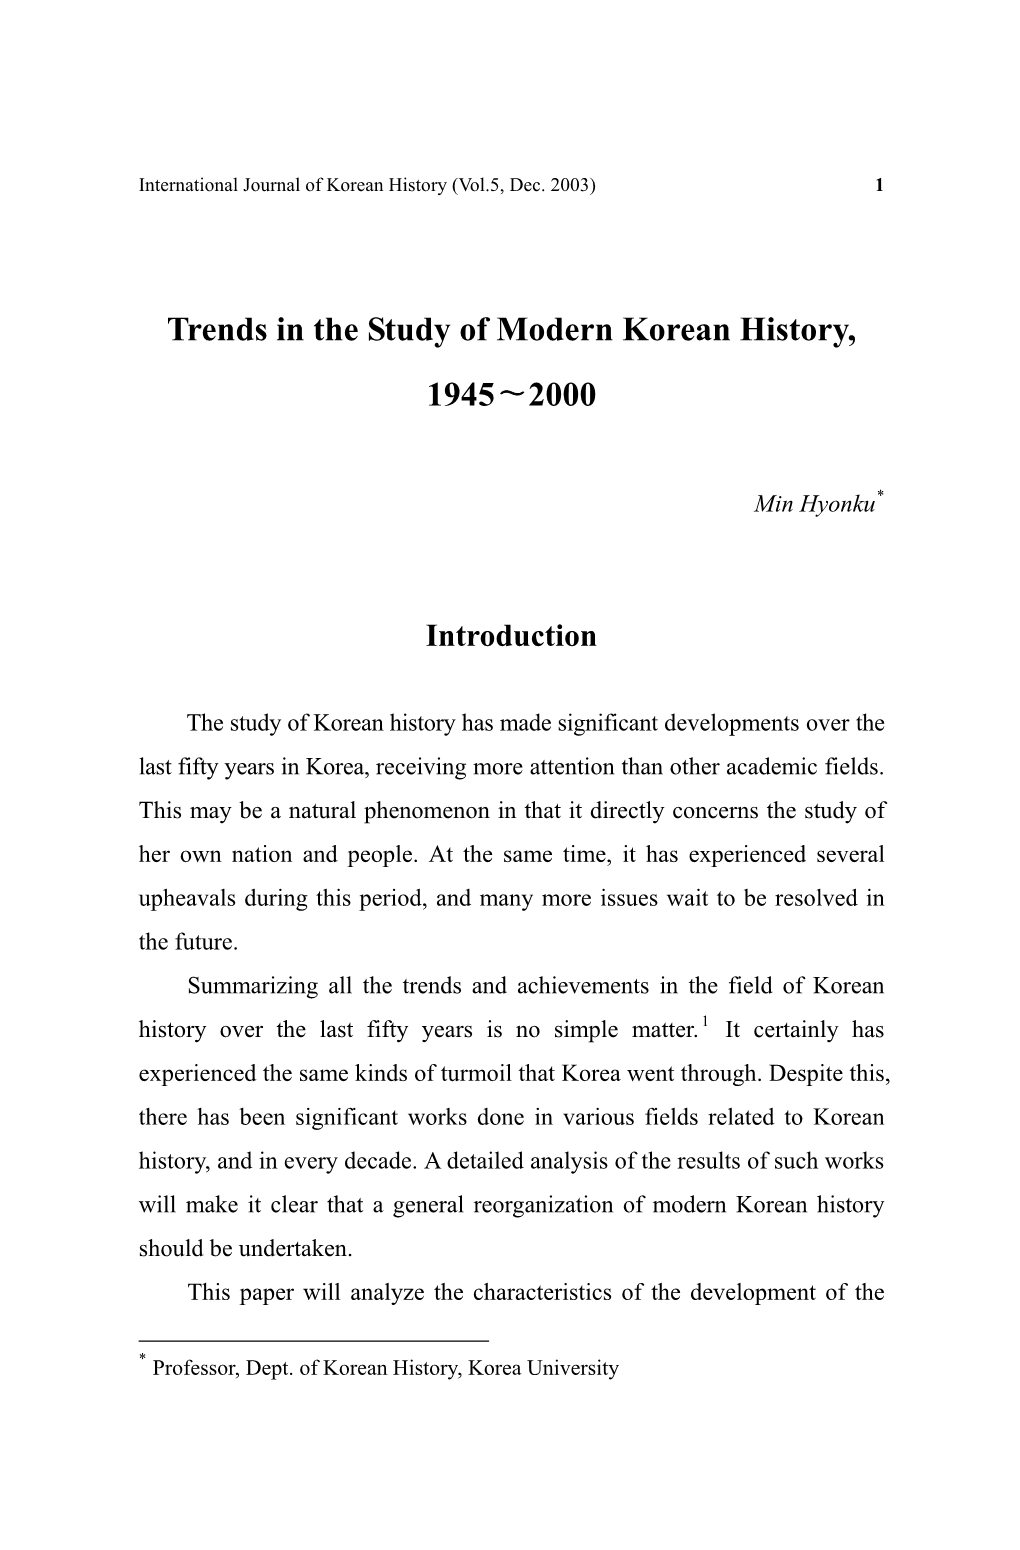 Trends in the Study of Modern Korean History, 1945-2000